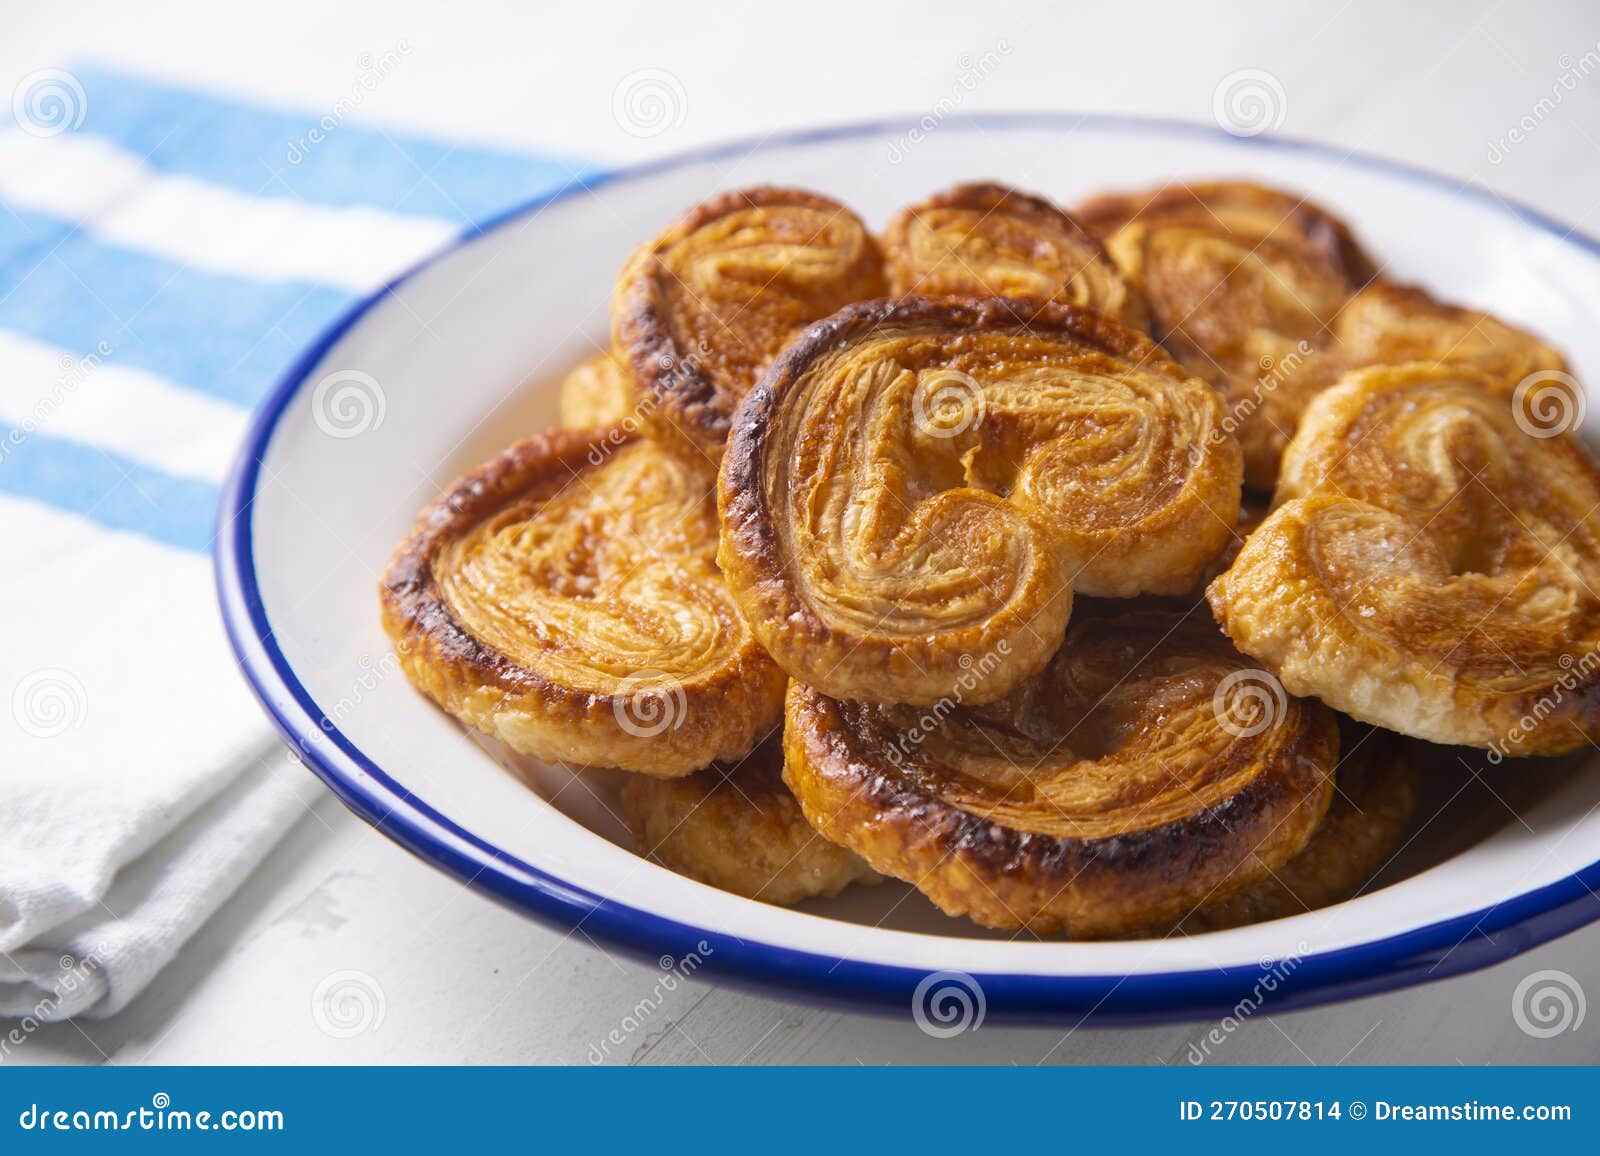 puff pastry glasses or palmeritas made with baked sugar.